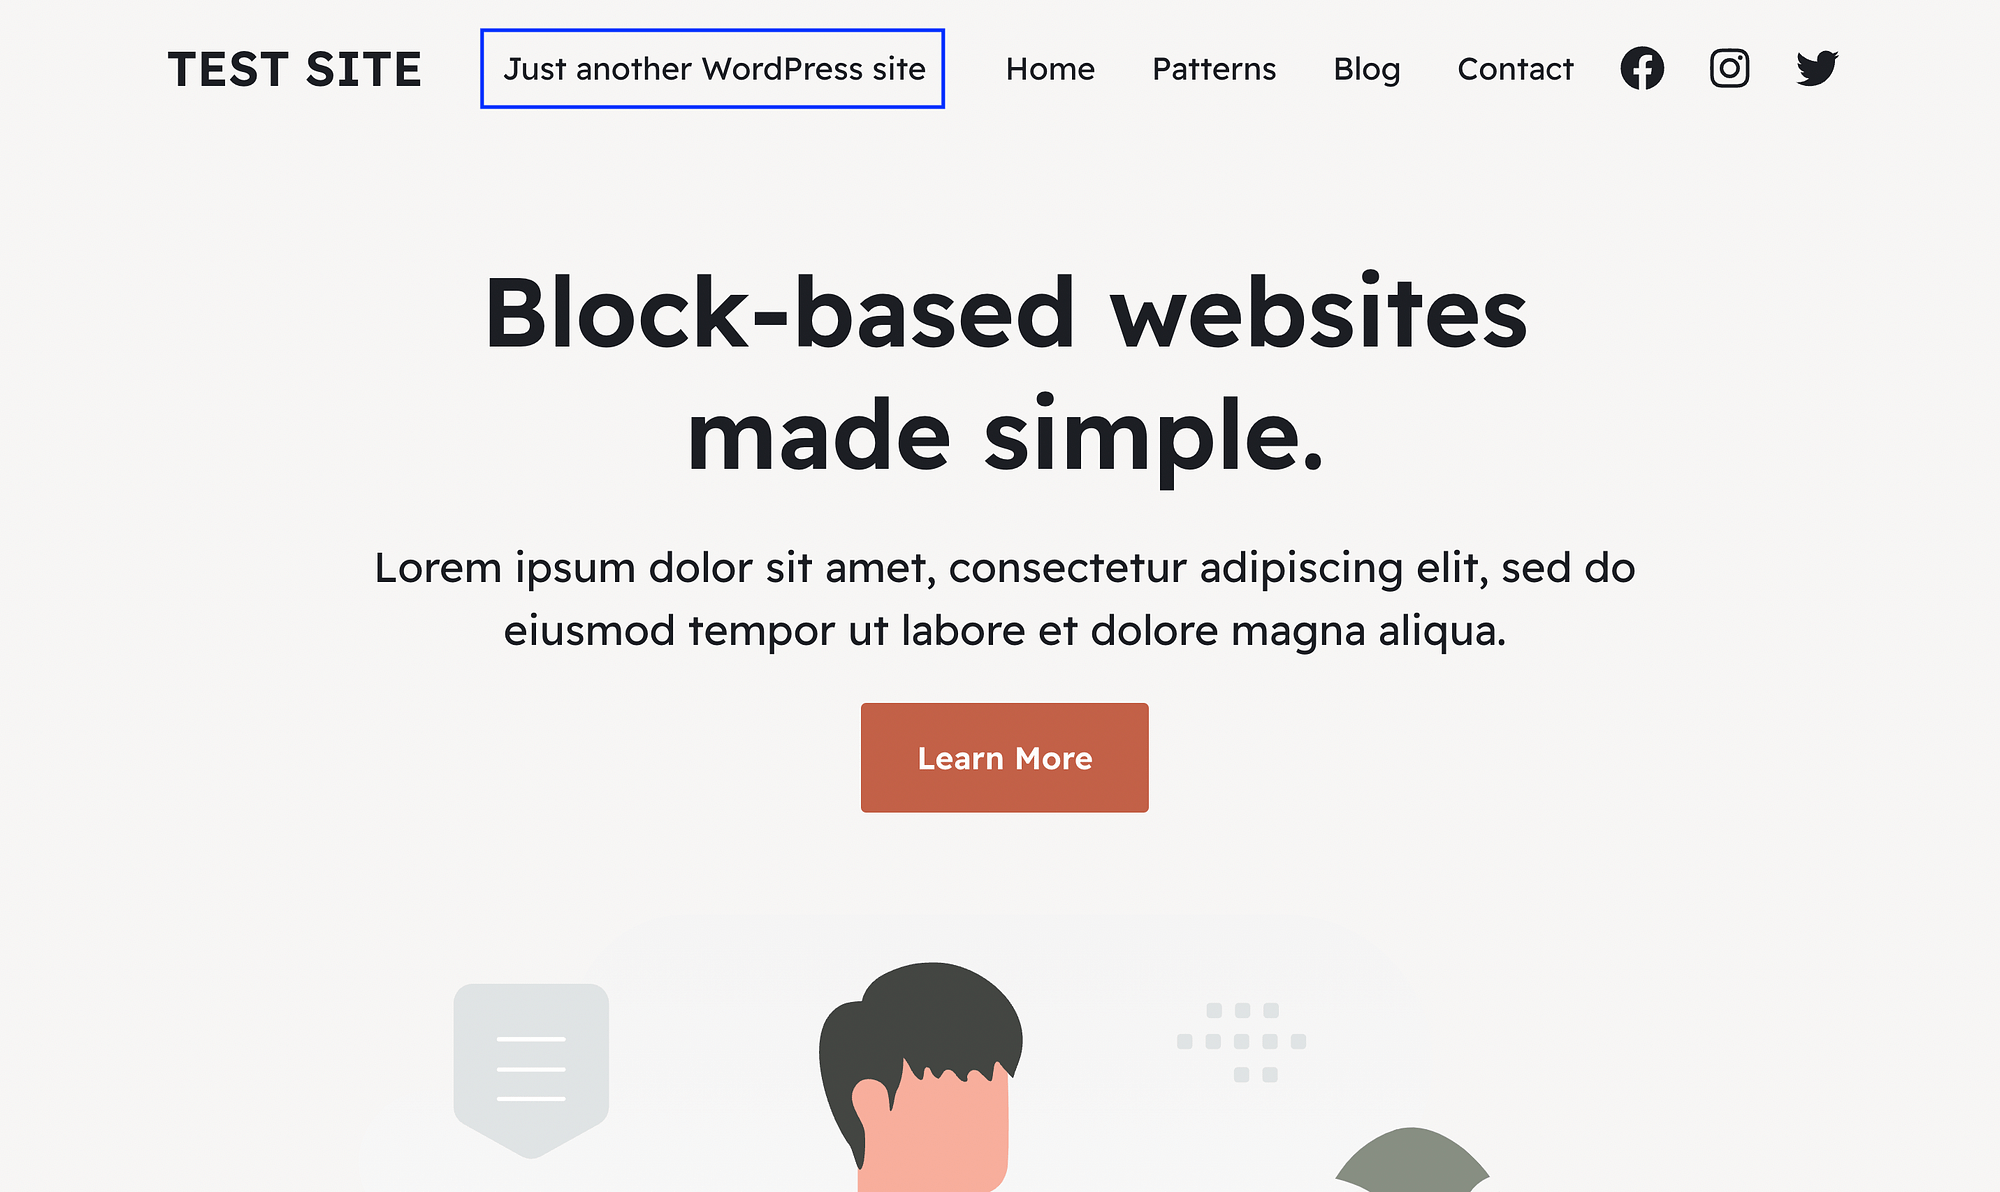 "Just another WordPress site" tagline example.